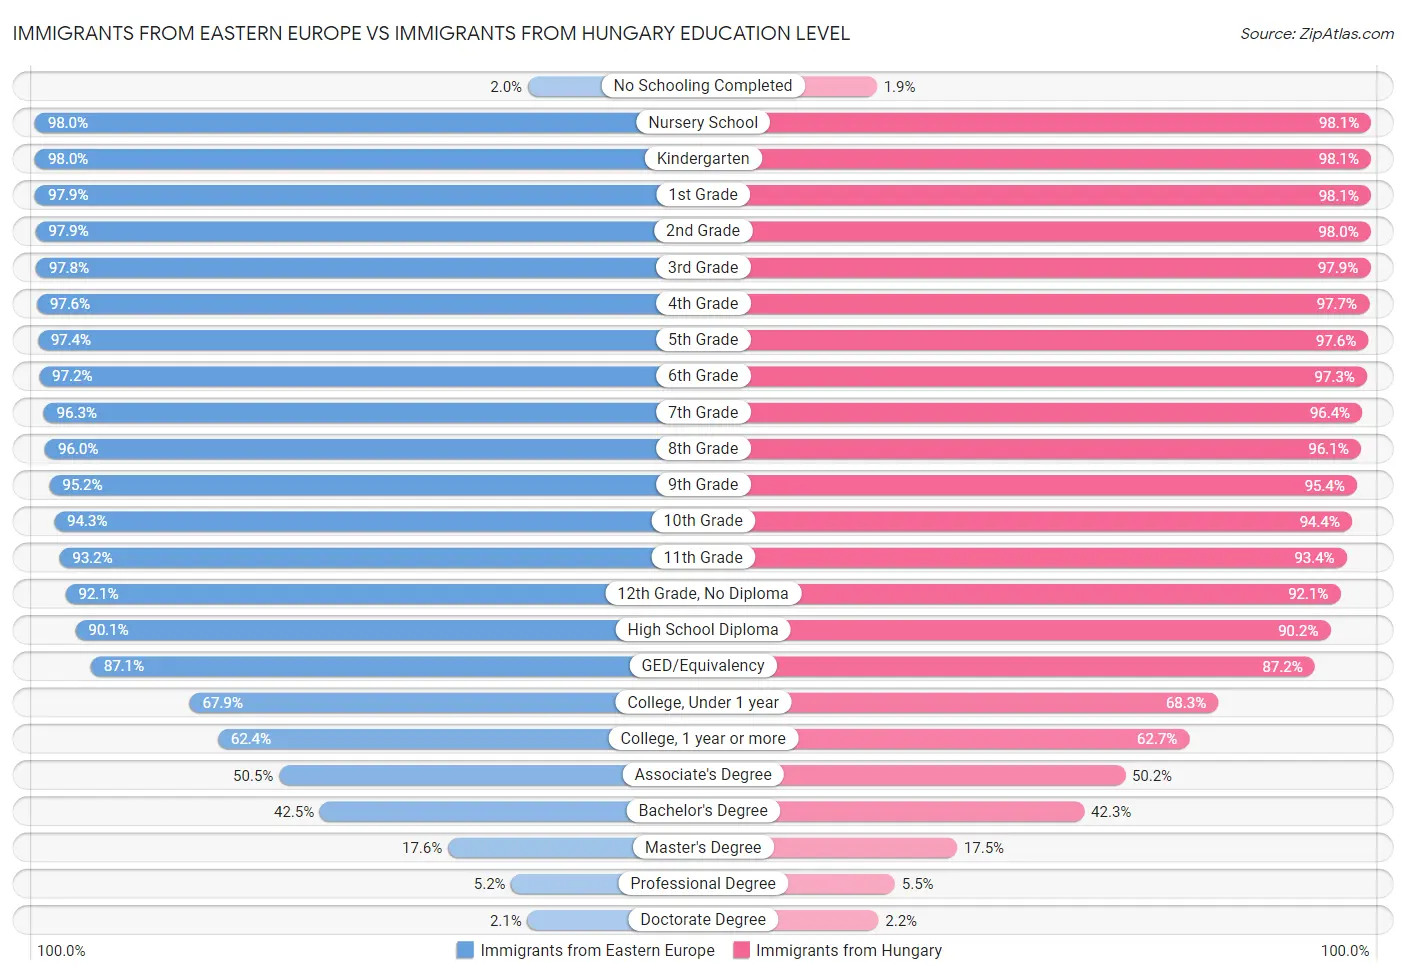 Immigrants from Eastern Europe vs Immigrants from Hungary Education Level